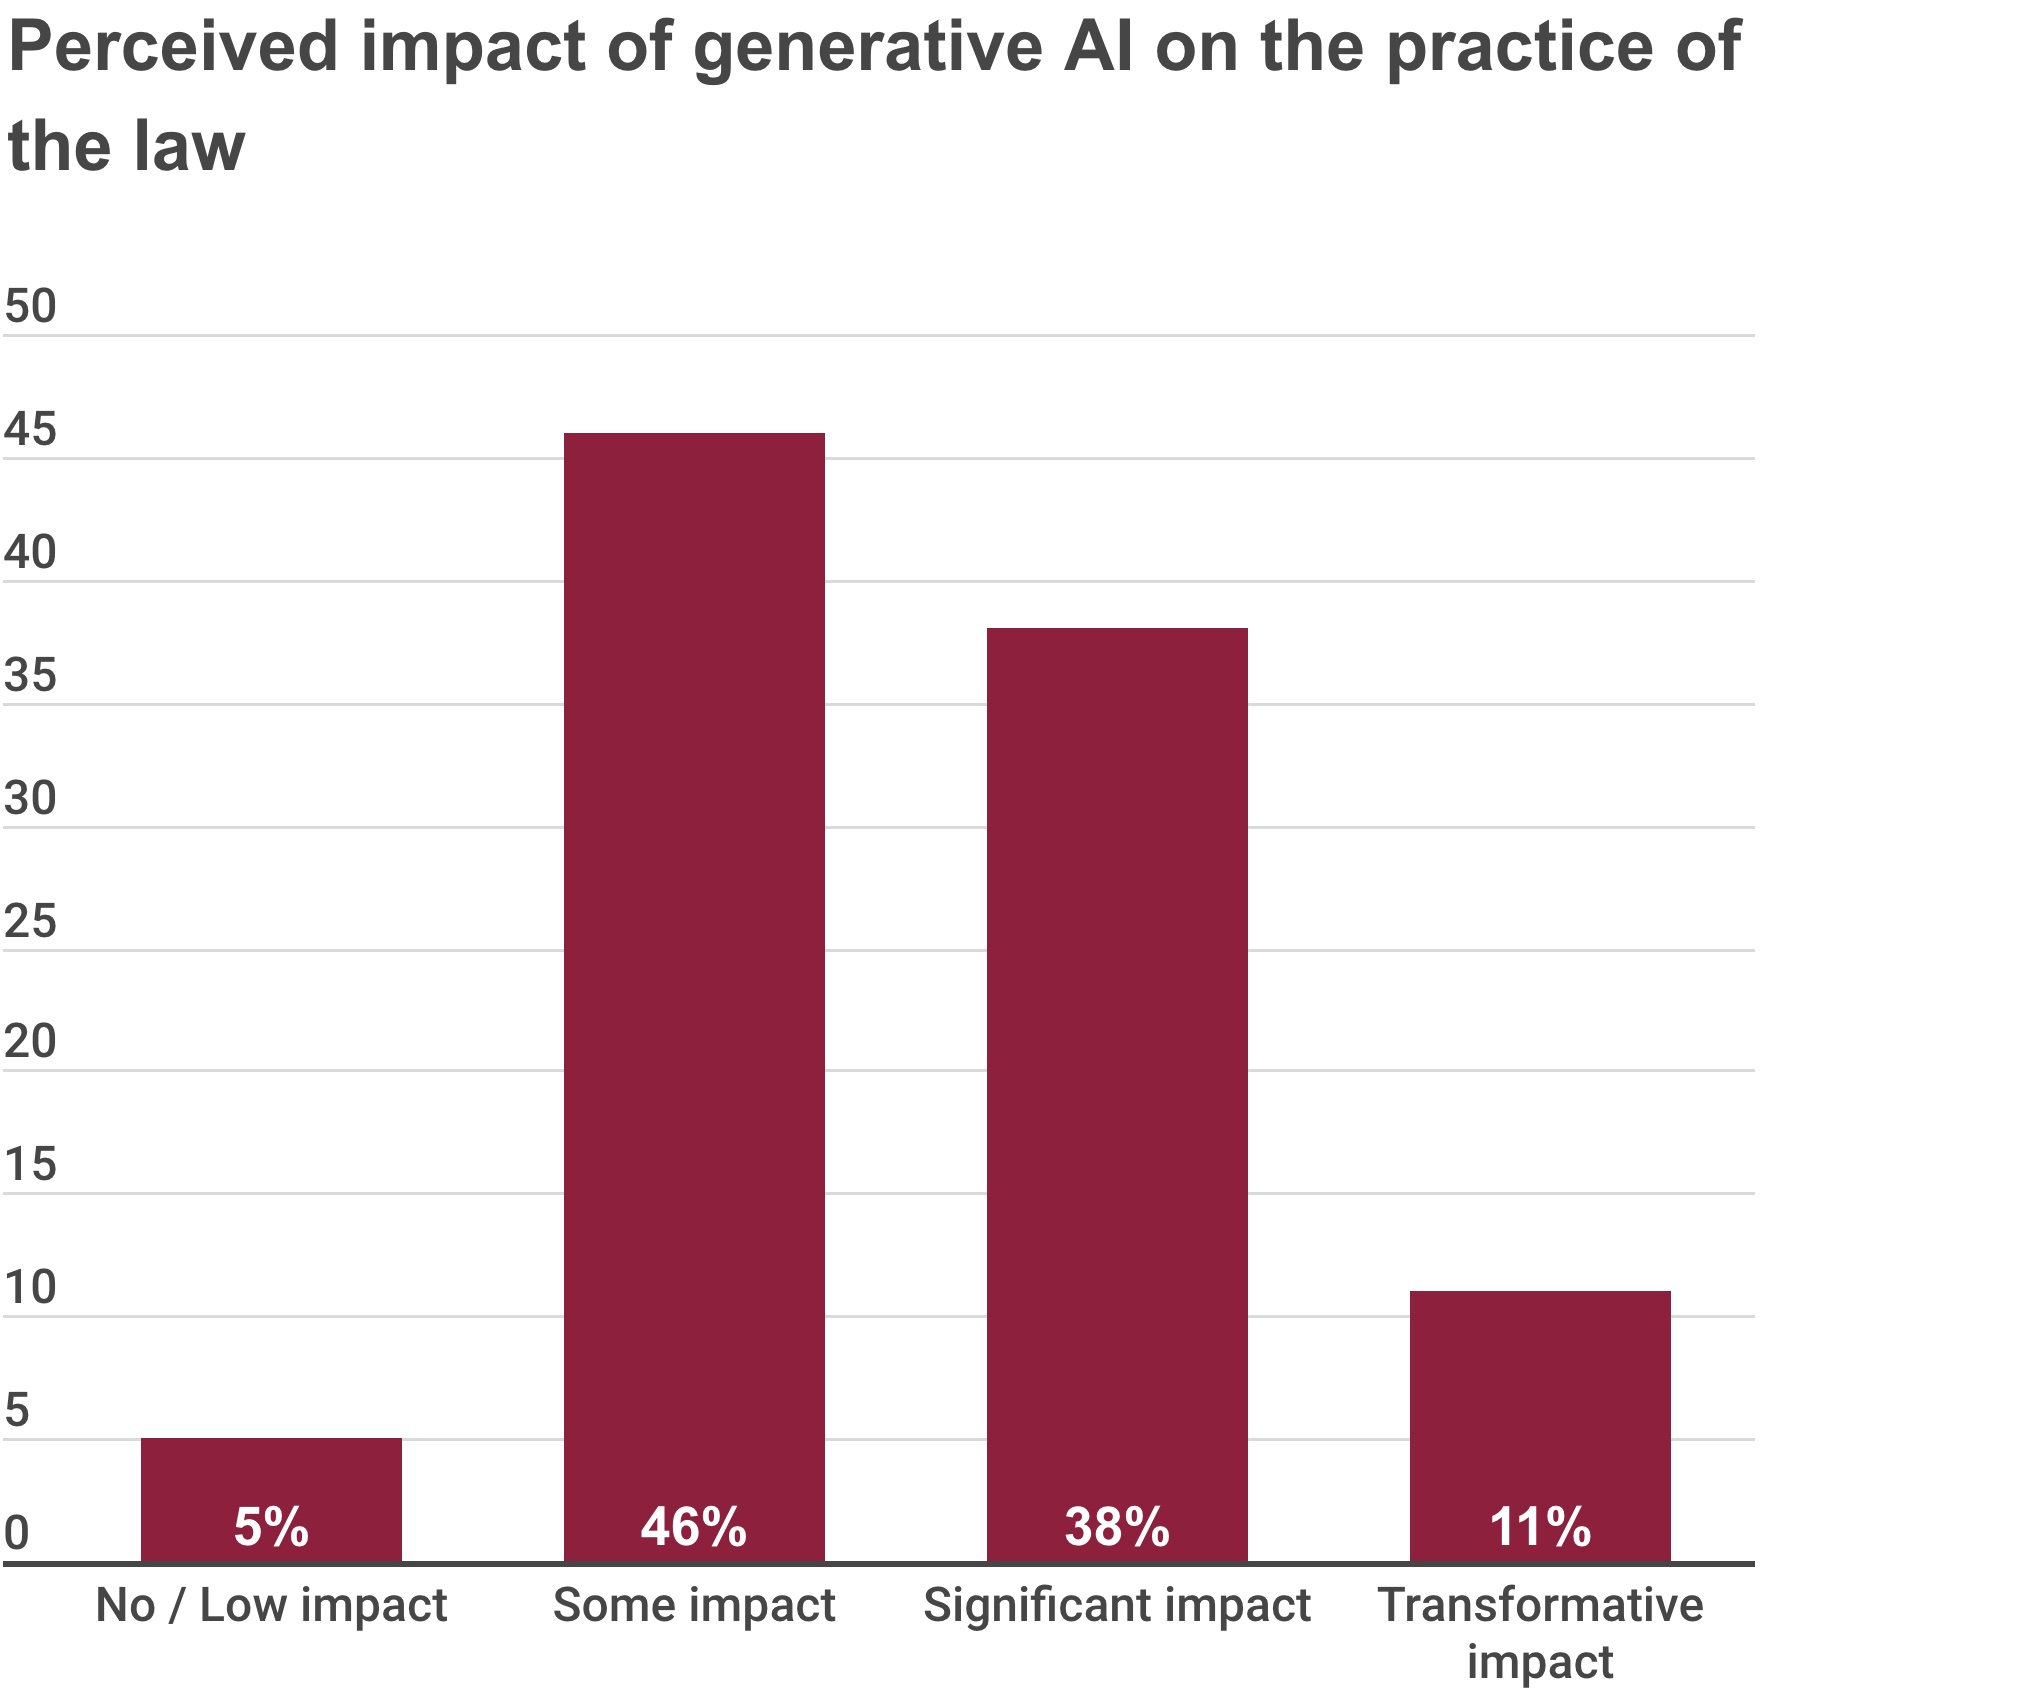 LexisNexis attorney survey question looking at the perceived impact of AI on the practice of law.